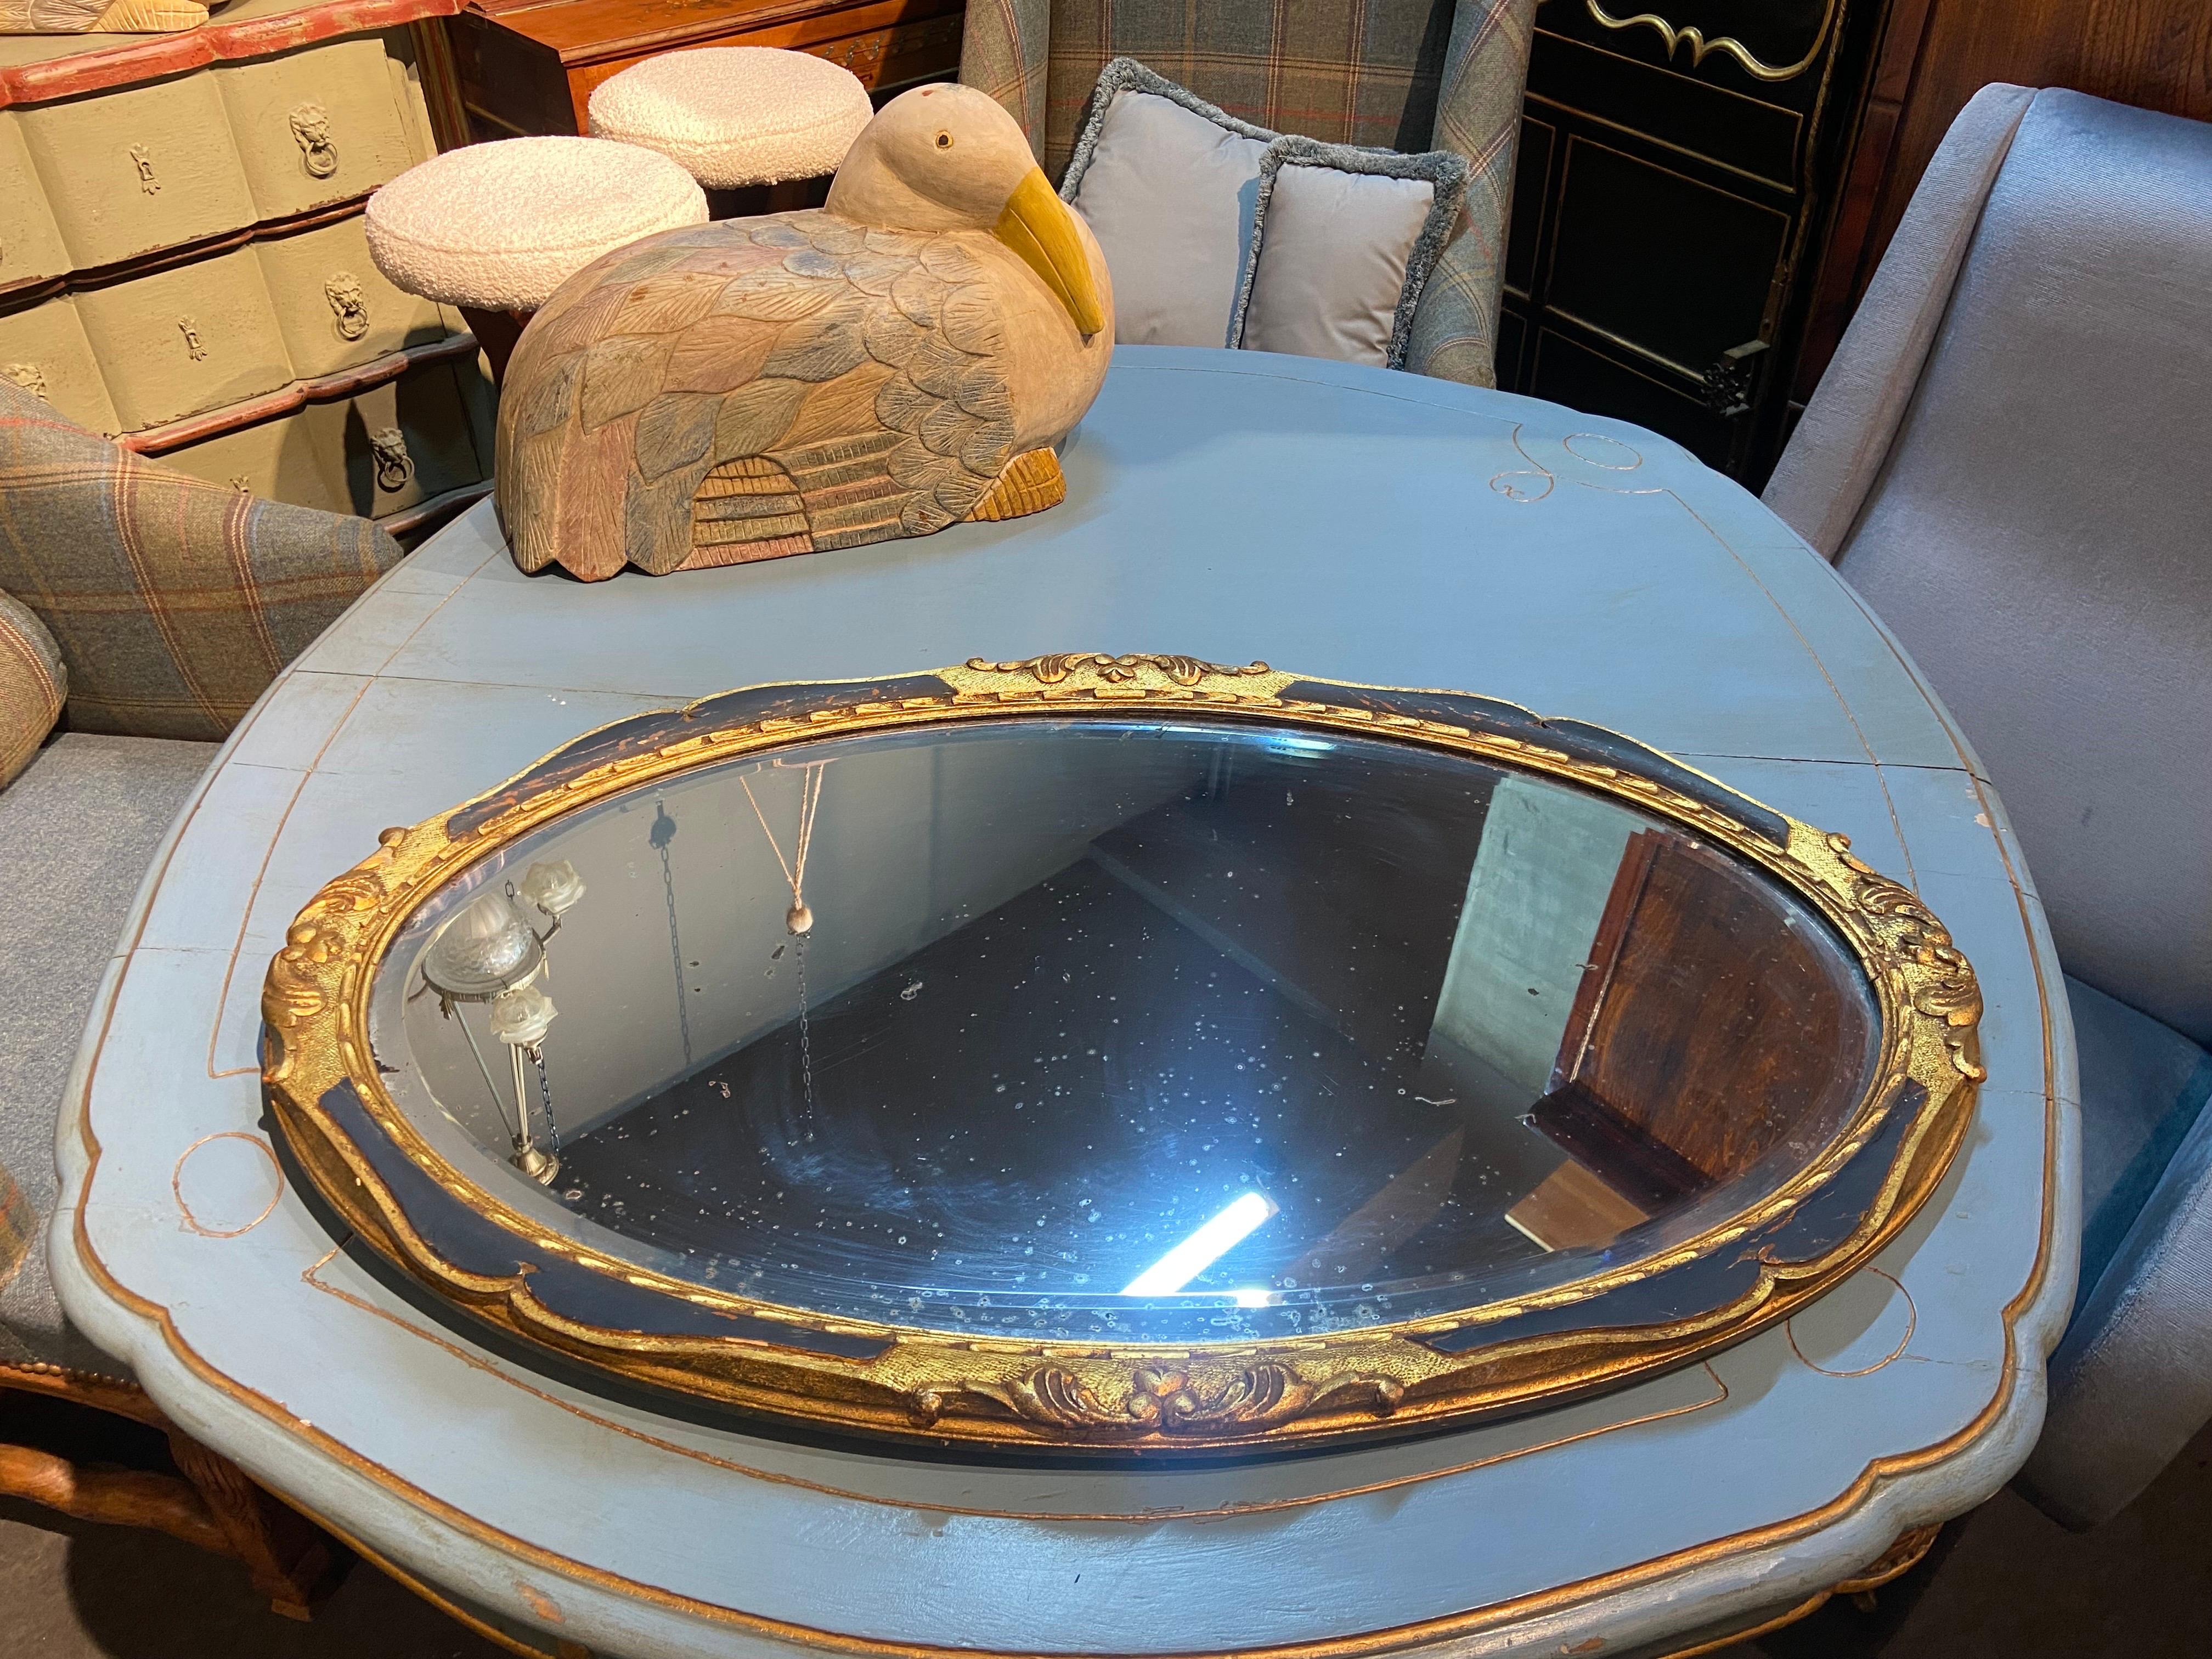 French wall mirror made in late 19th century. It has an oval shape with gilt wood symmetrical floral decorations and may be used vertically or horizontally. Still wears its original glass which is not in very good condition and could be replaced.